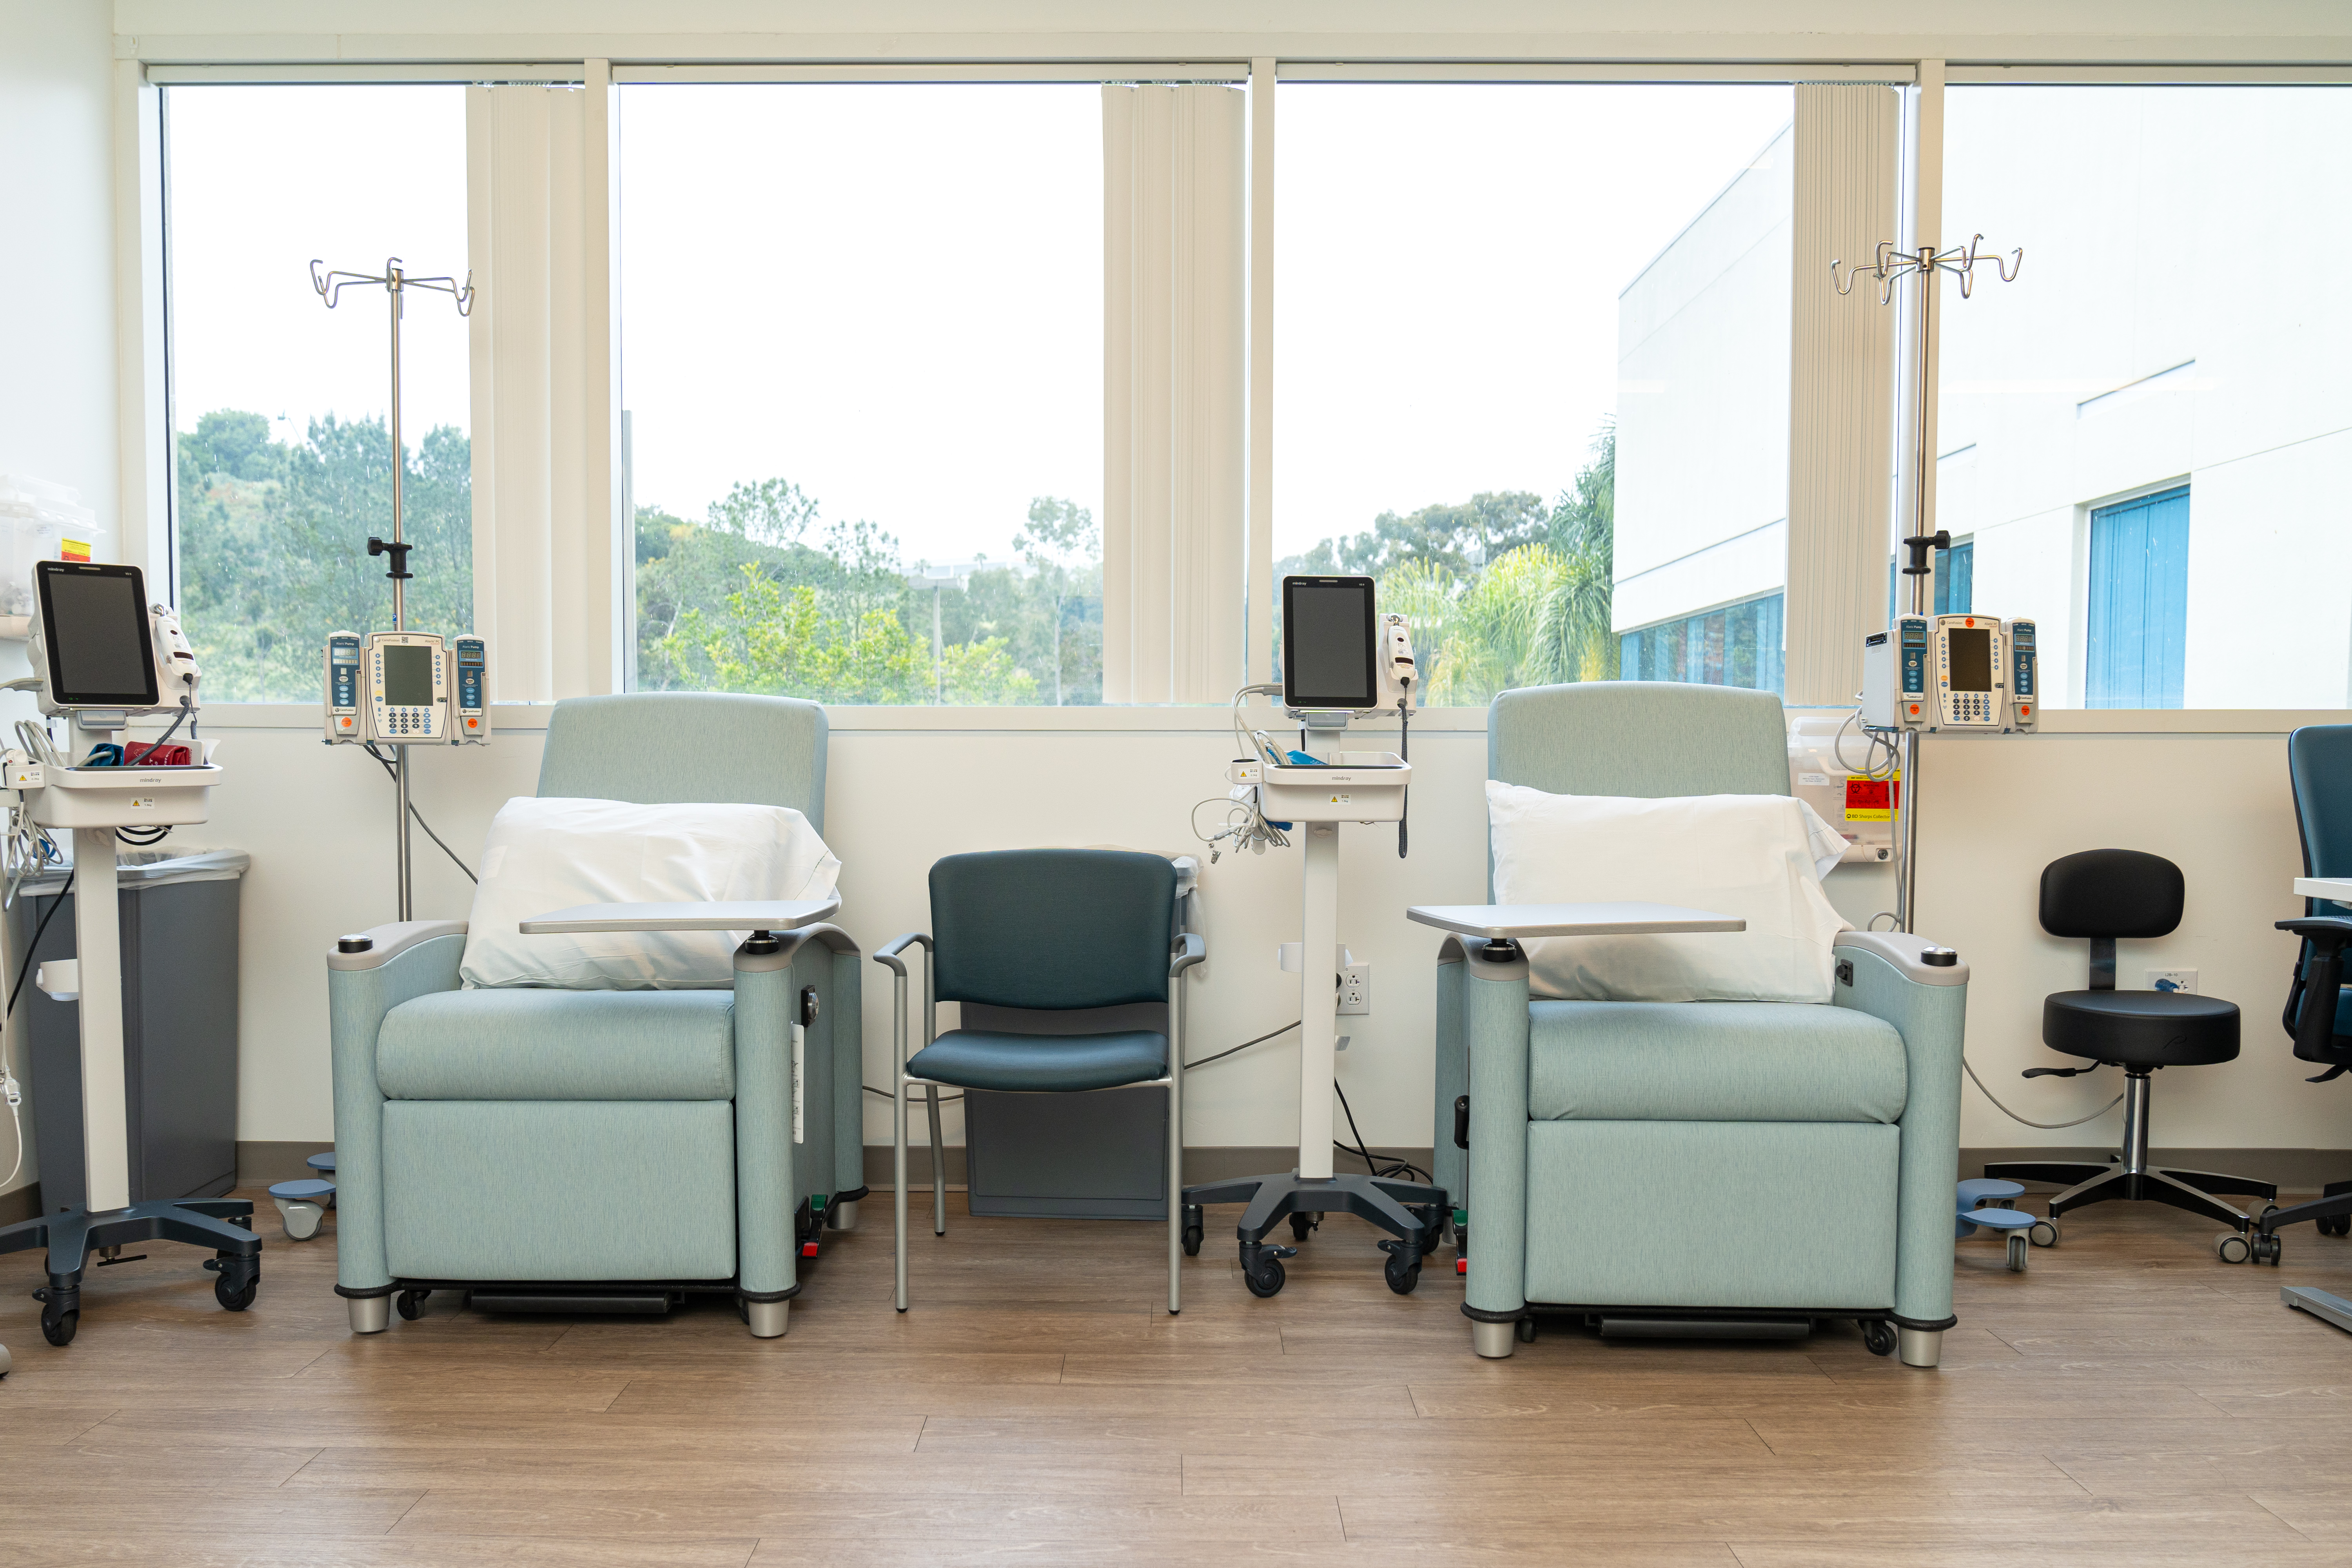 Infusion therapy chairs at the Rancho Bernardo clinic